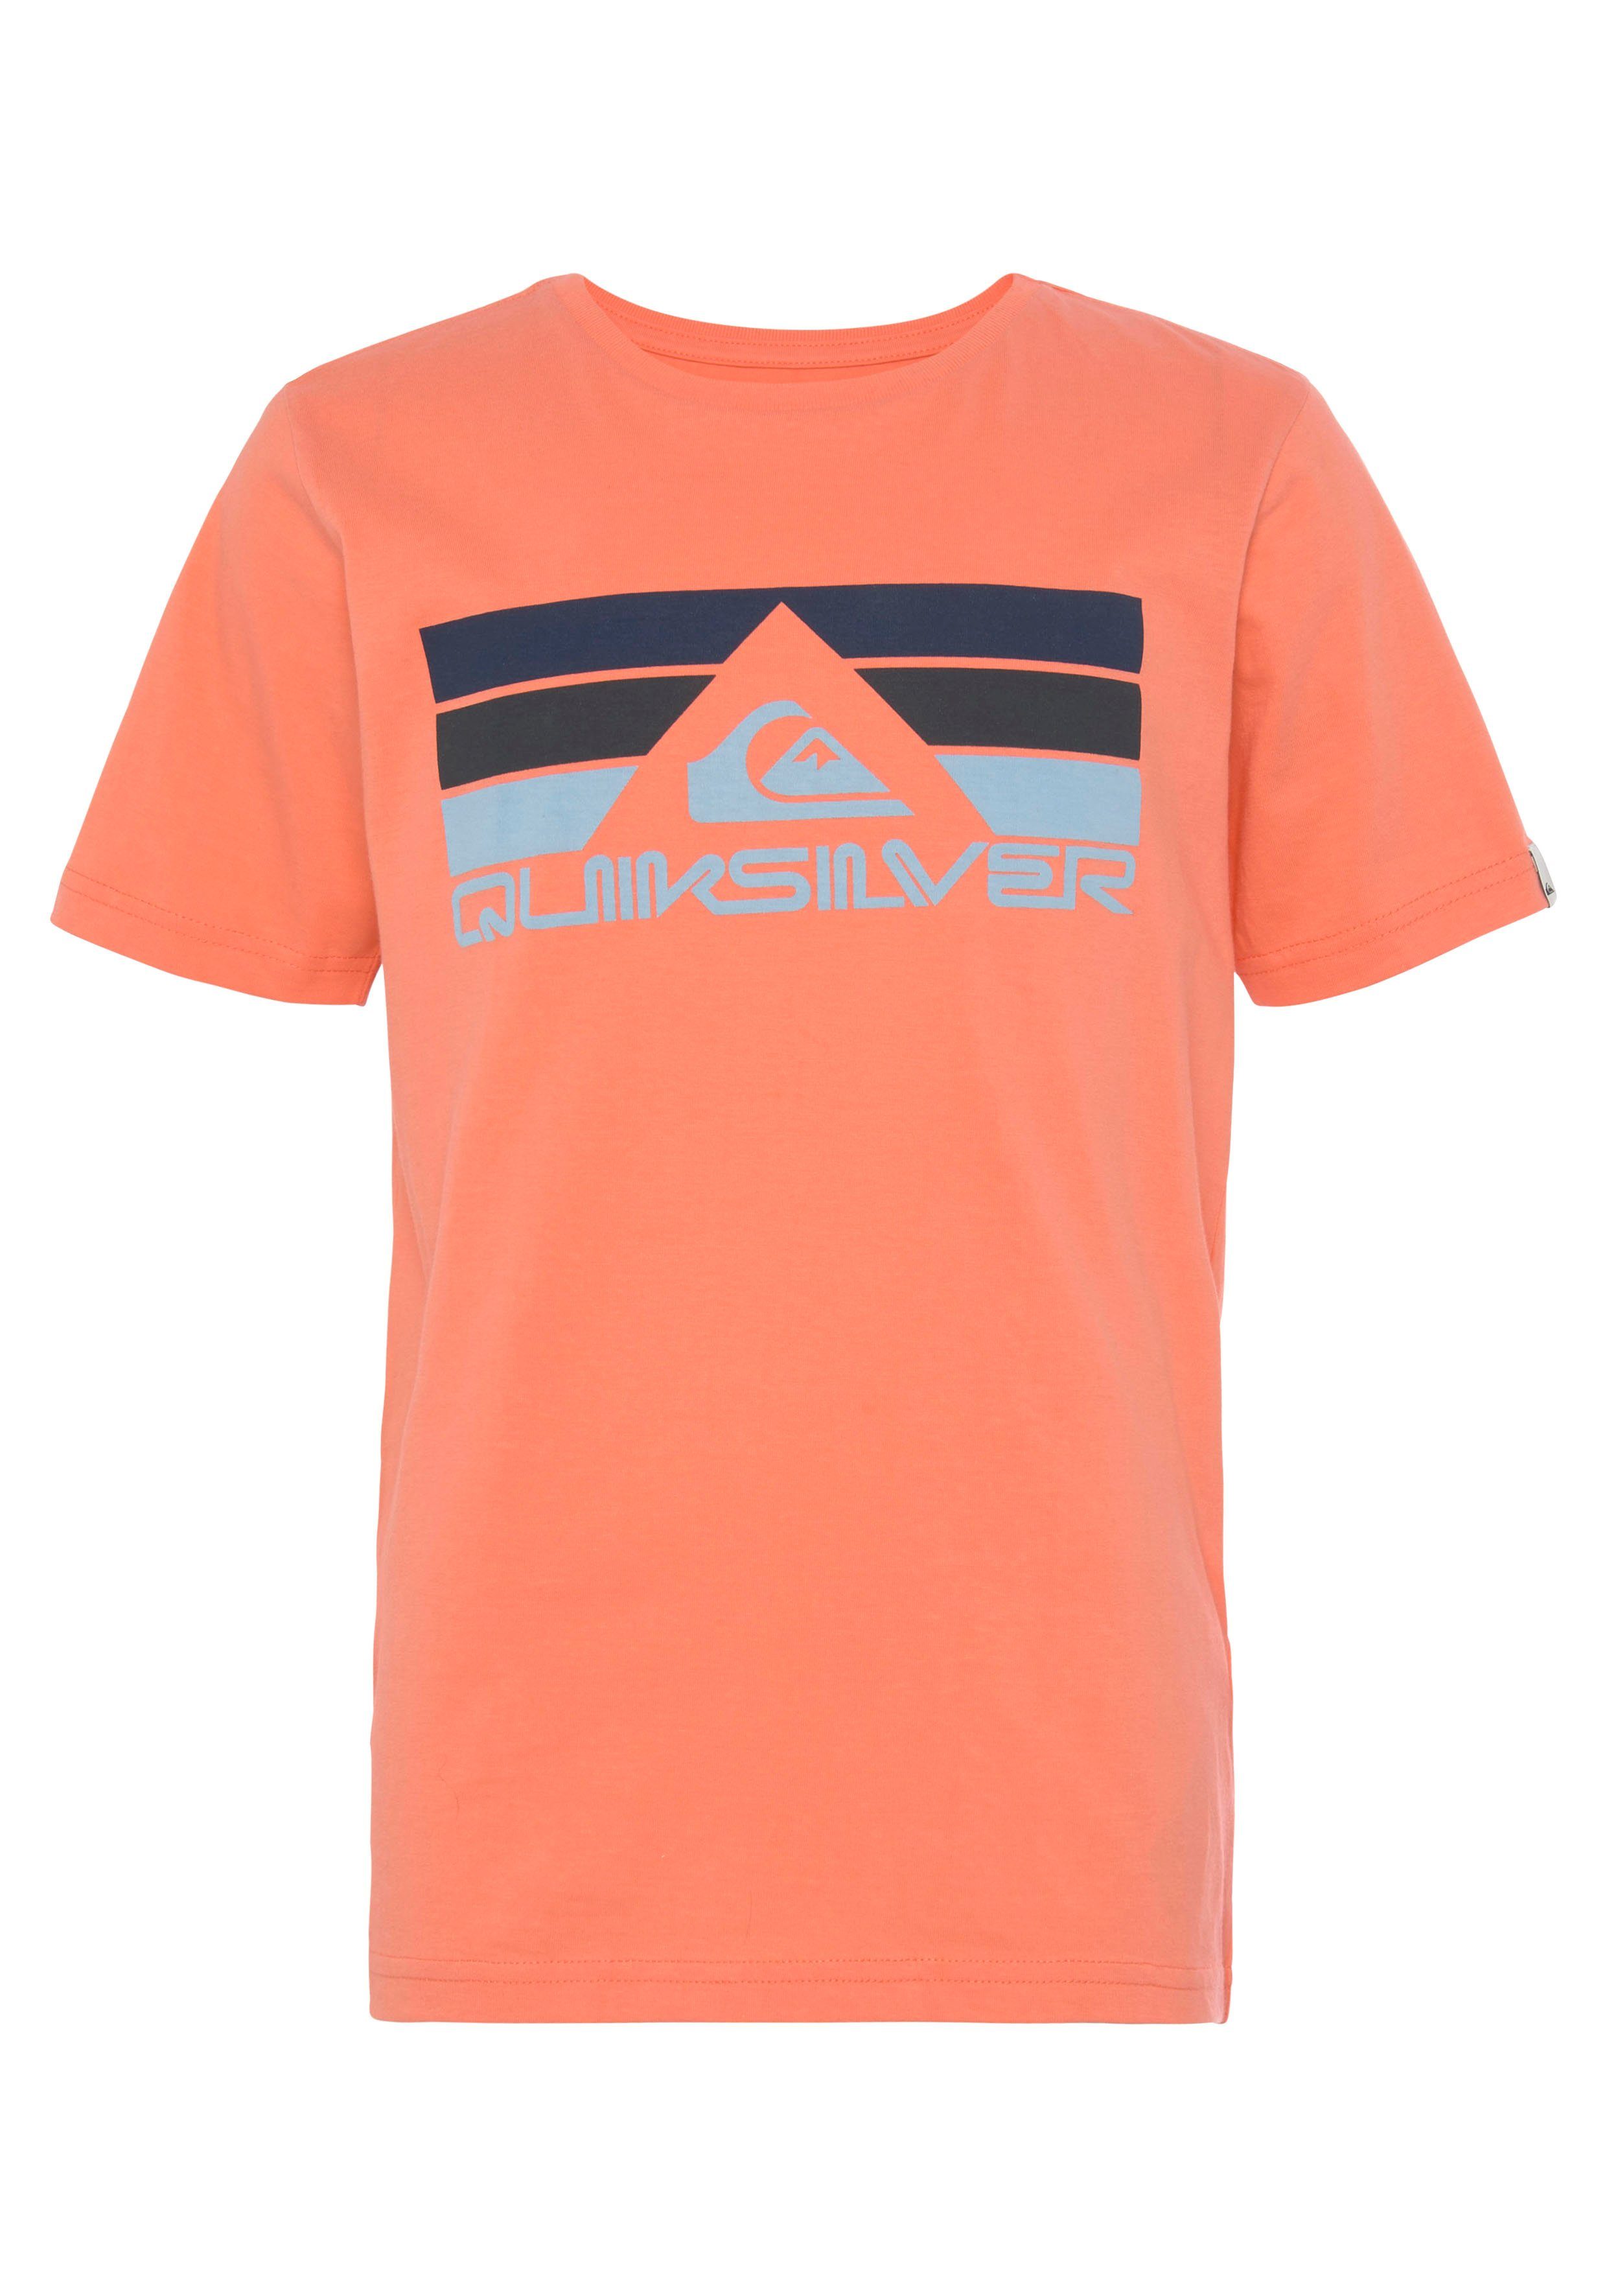 Quiksilver T-Shirt YOUTH TEE ROCKY SHORT Kinder - für CAB SLEEVE PACK